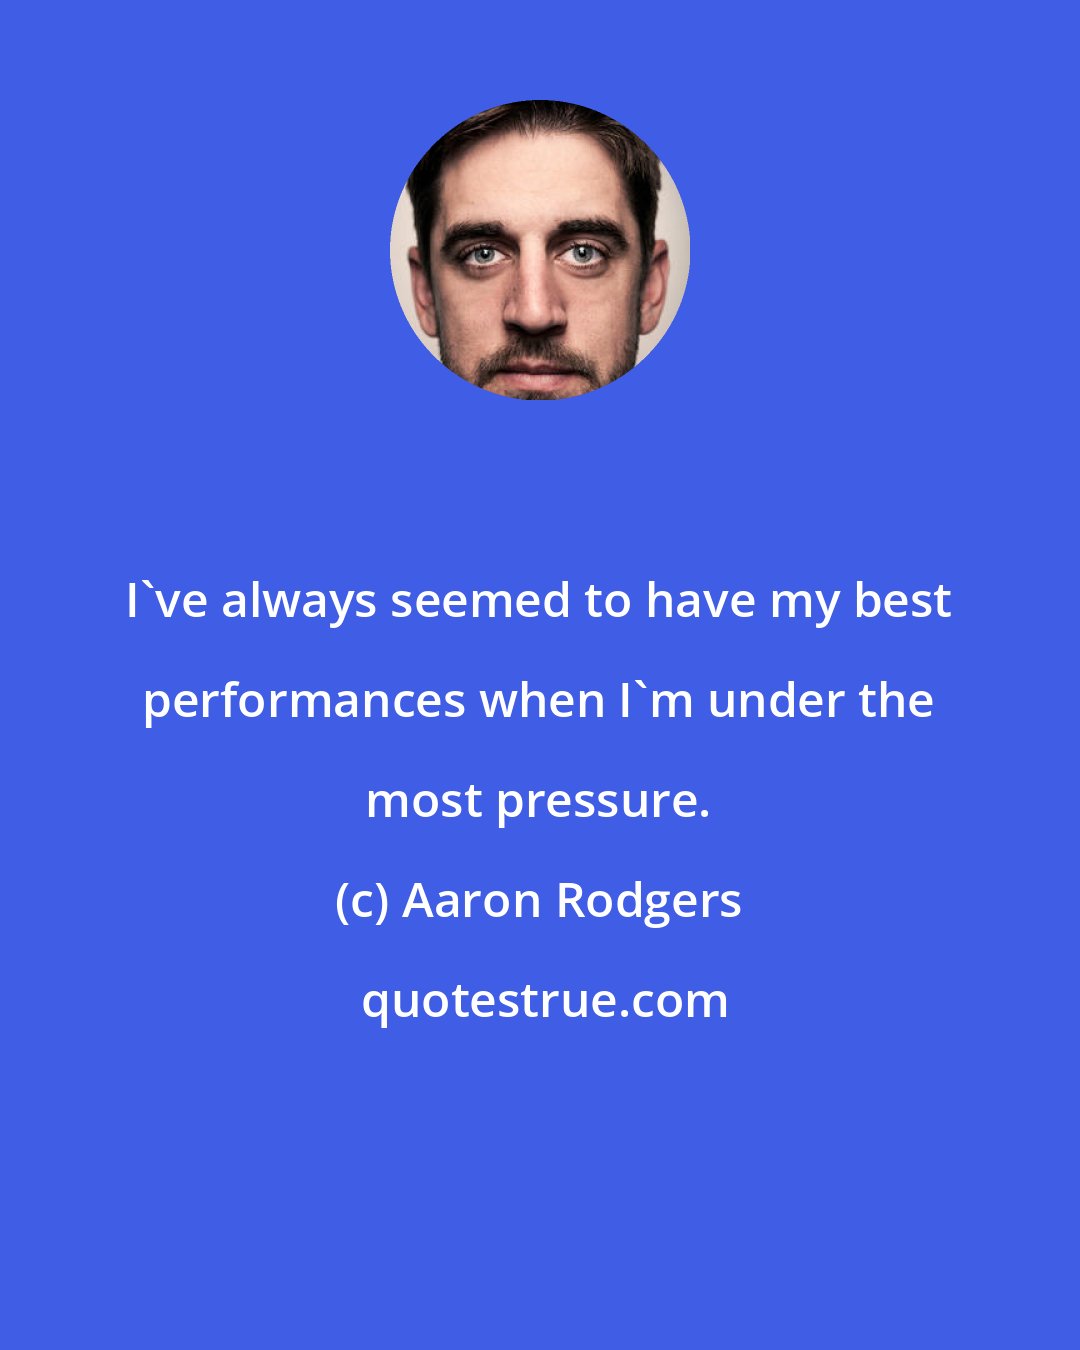 Aaron Rodgers: I've always seemed to have my best performances when I'm under the most pressure.